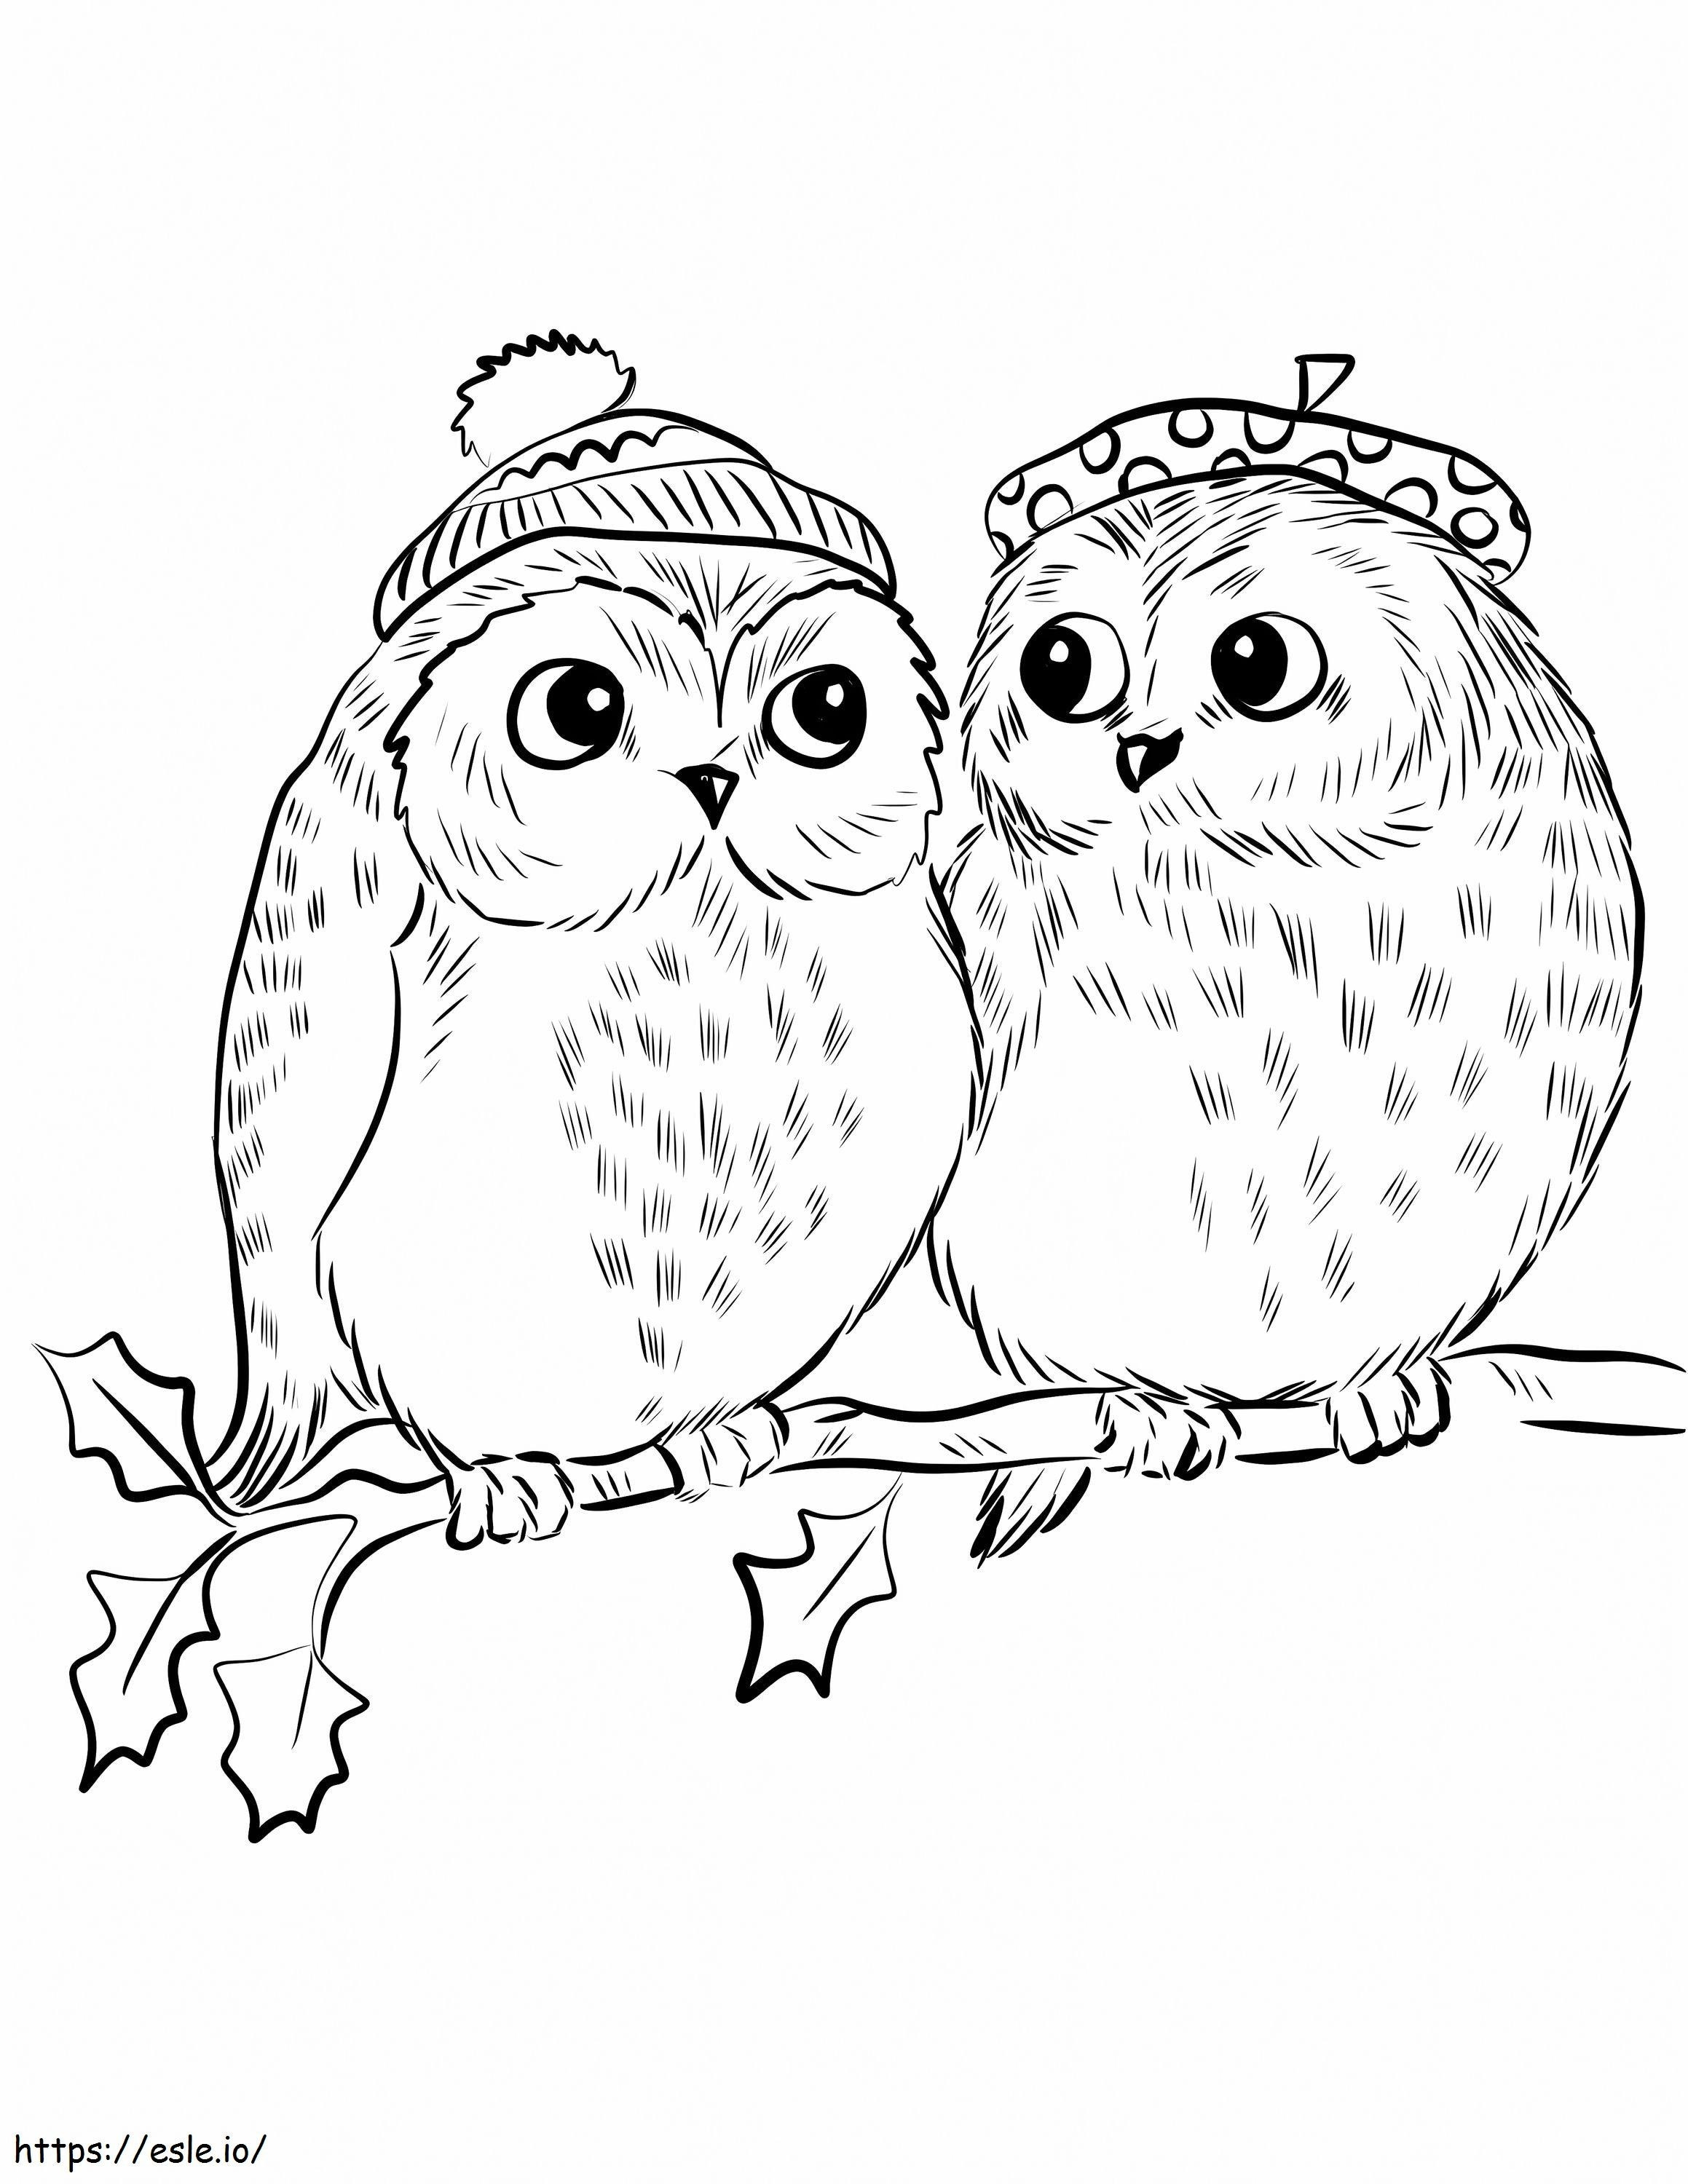 Couple Of Cute Owls coloring page